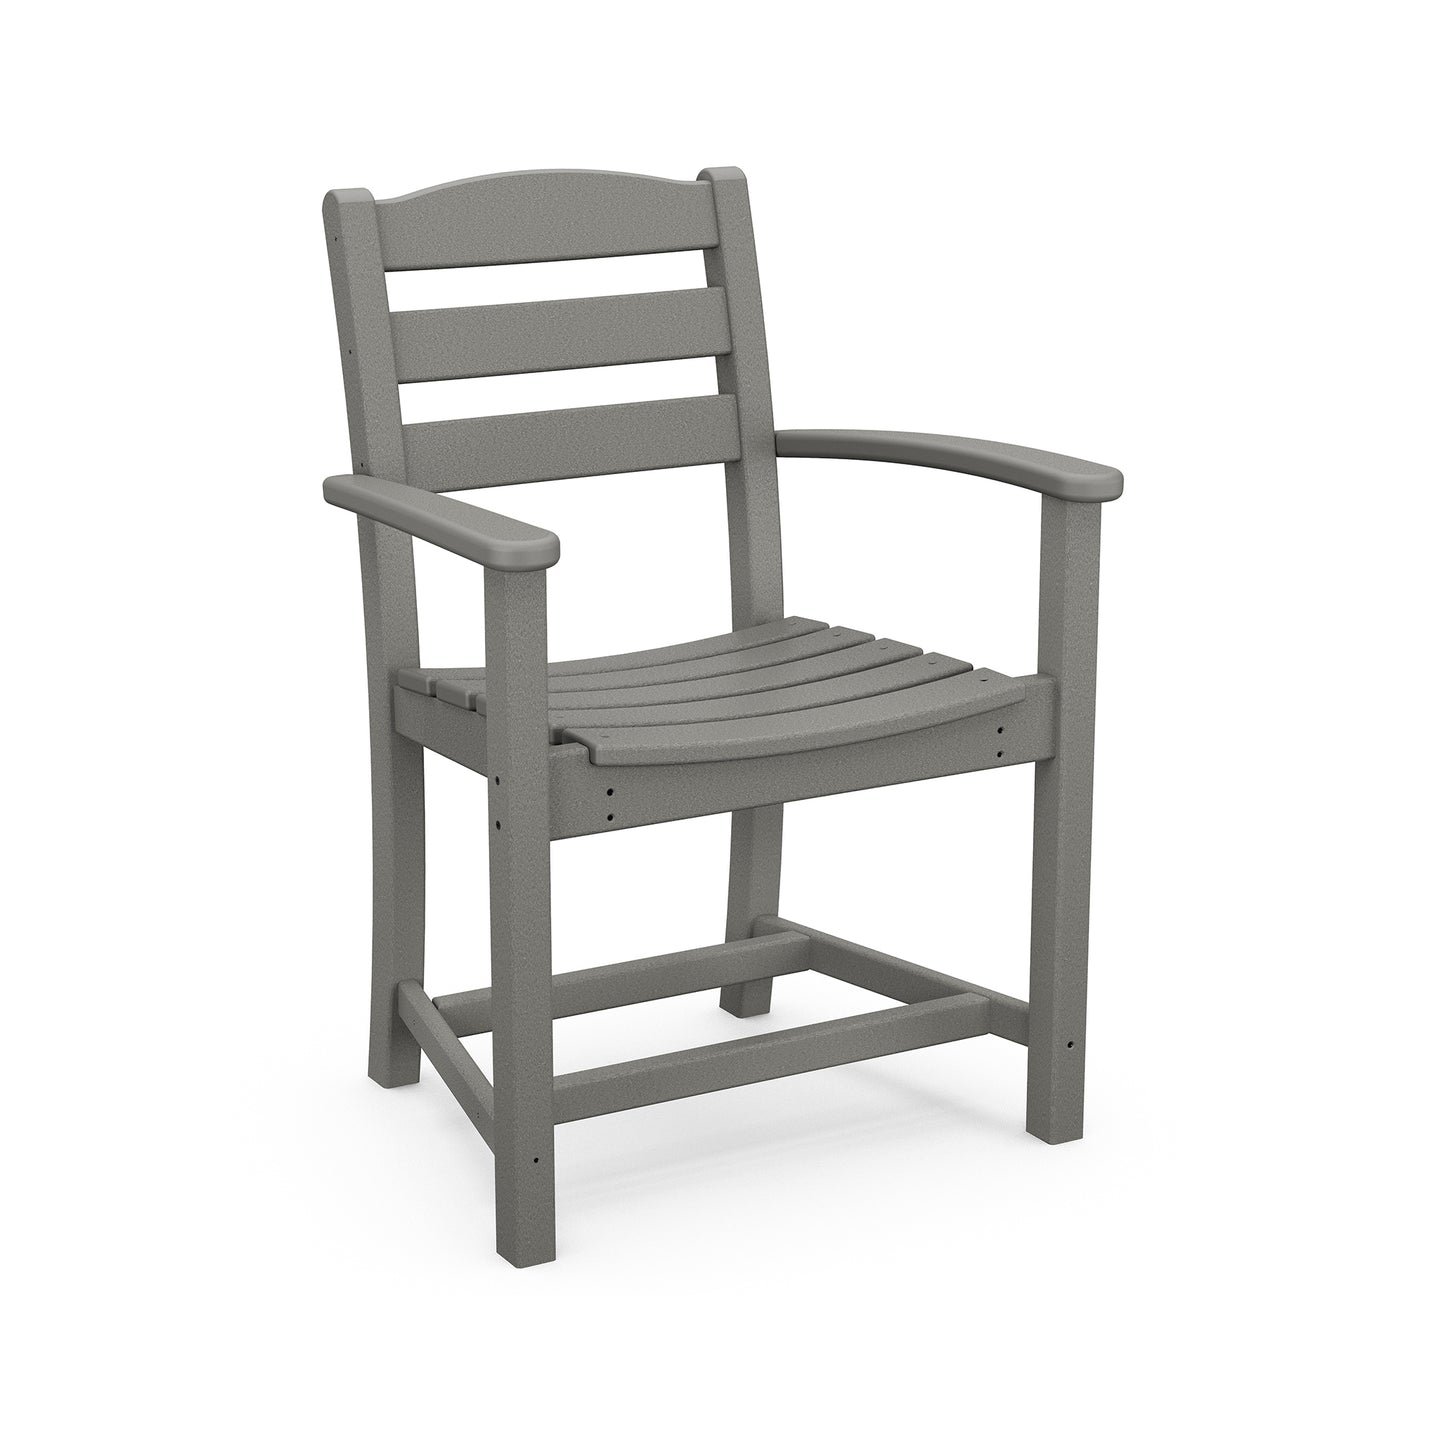 A gray, plastic, POLYWOOD La Casa Cafe outdoor dining arm chair with a slatted back and seat, featuring broad armrests. This outdoor patio furniture is displayed against a plain white background.